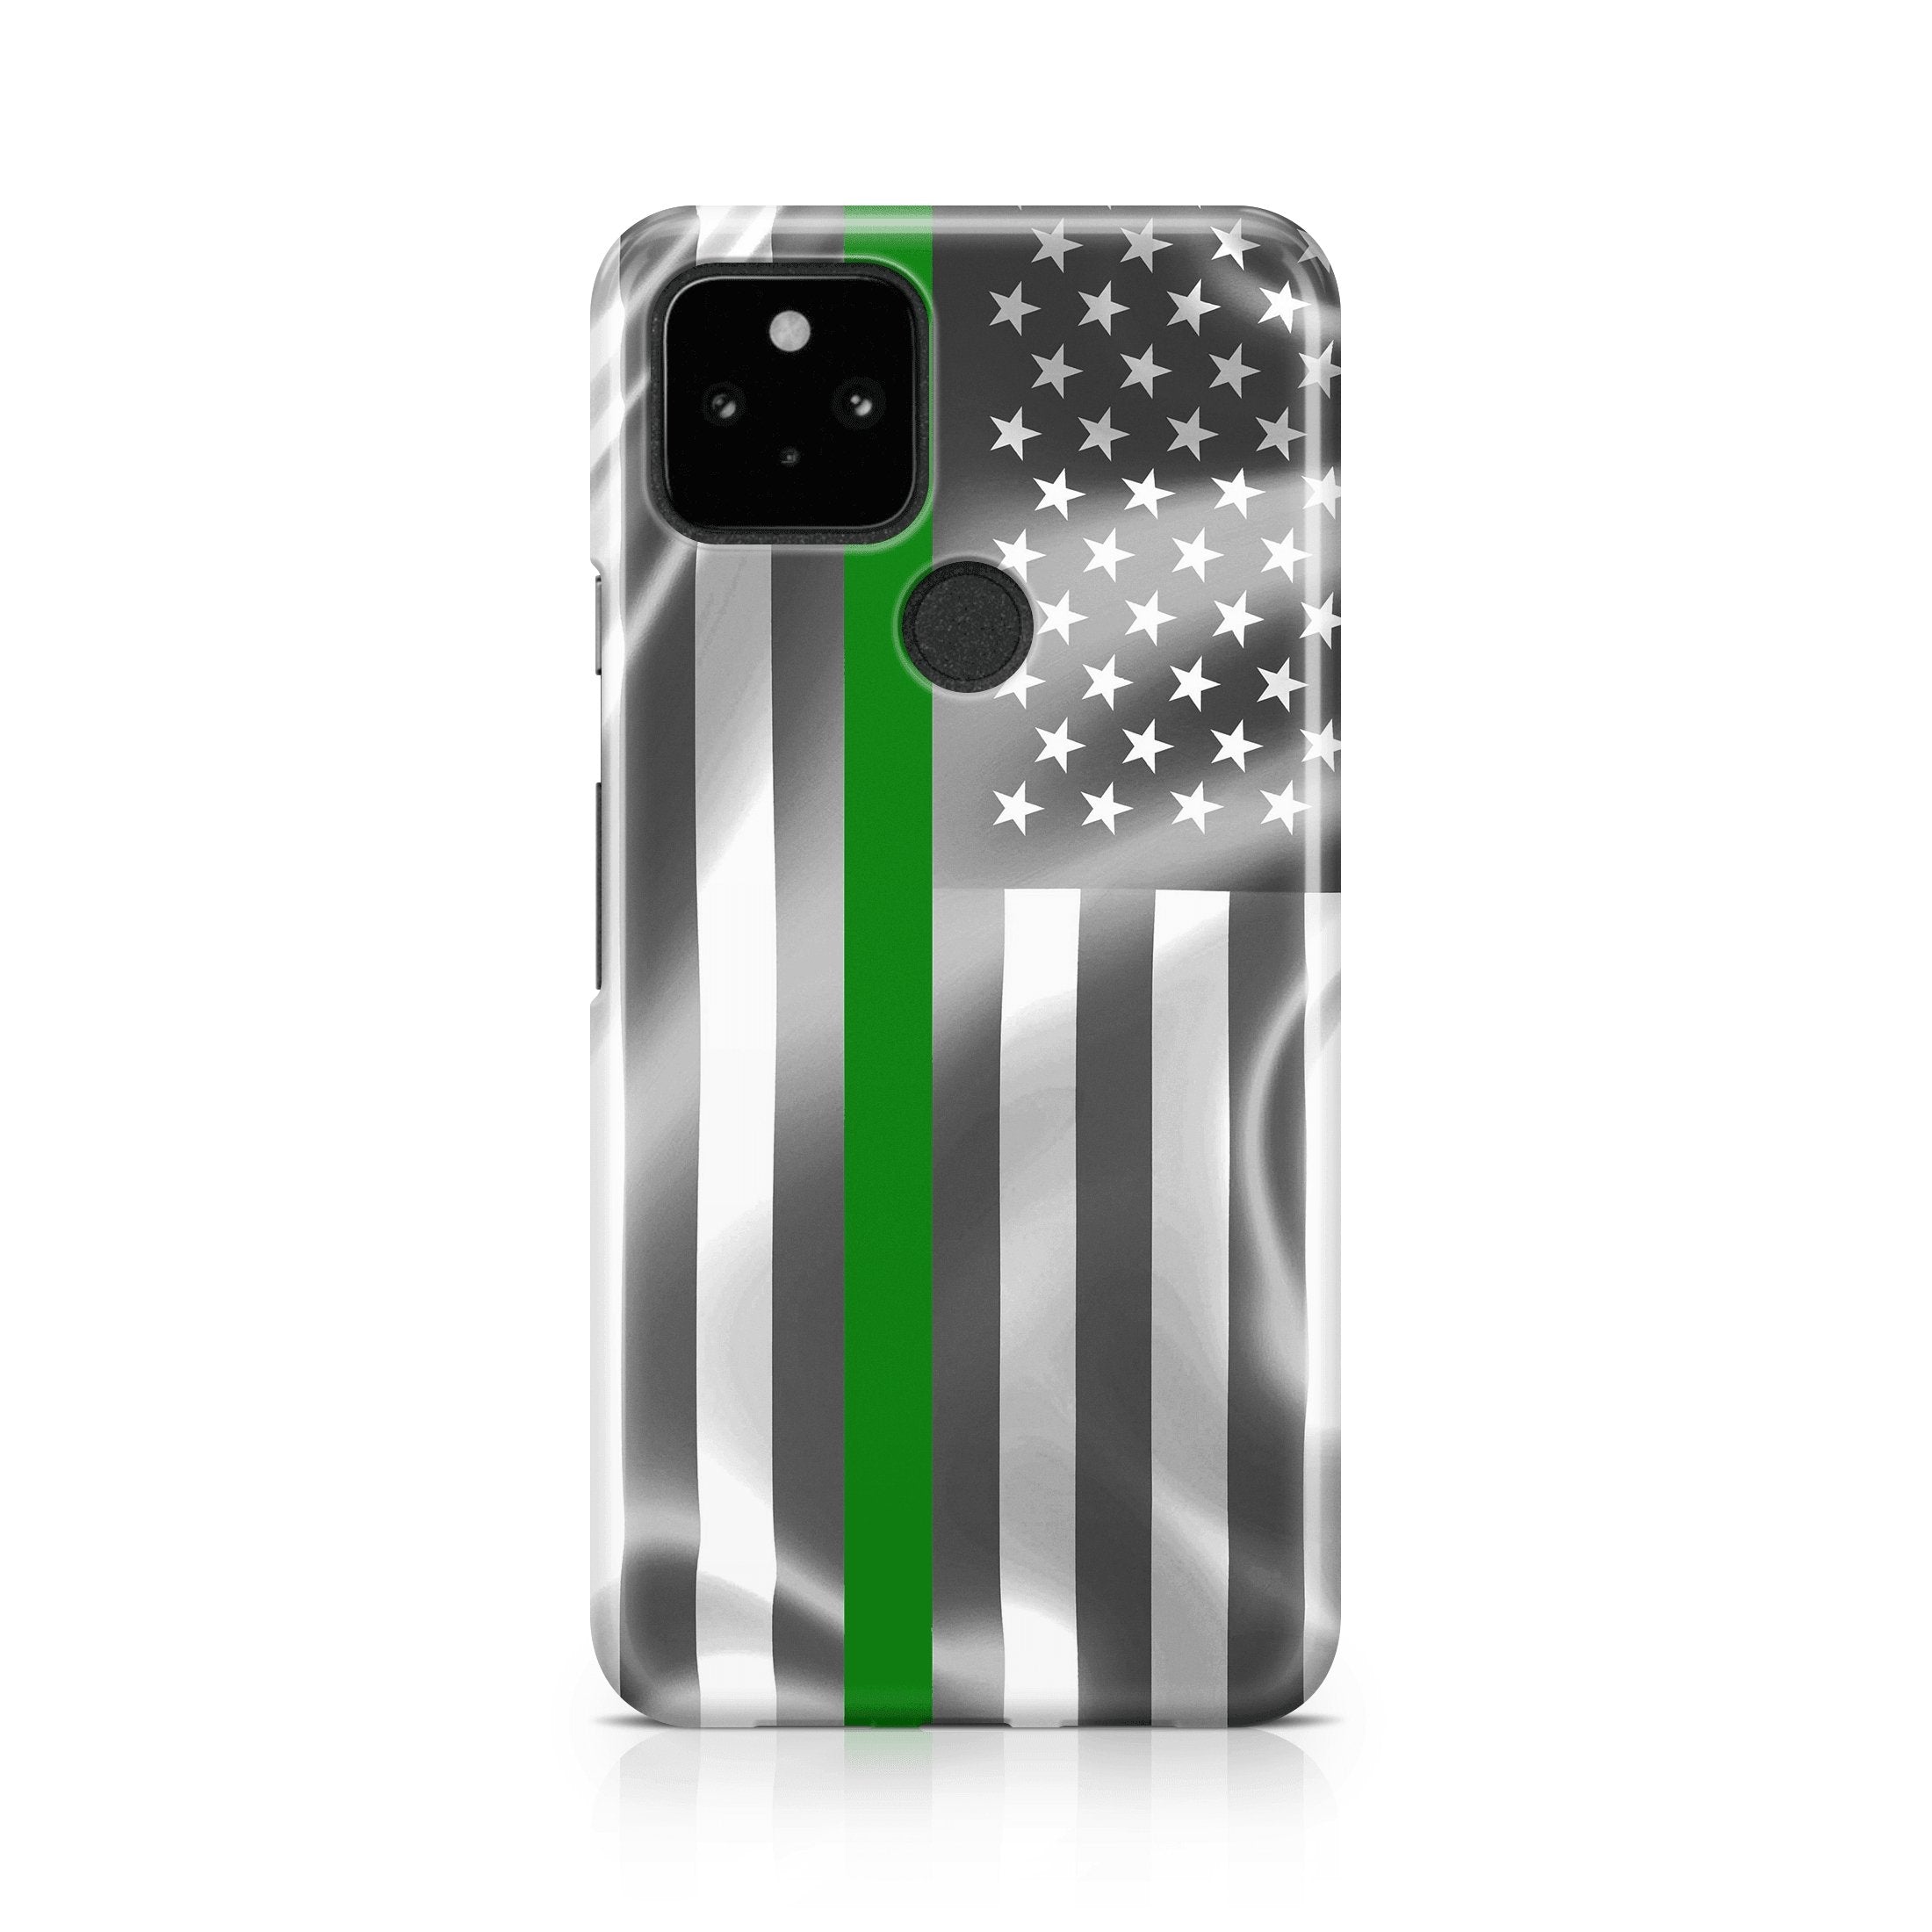 Thin Green Line - Google phone case designs by CaseSwagger